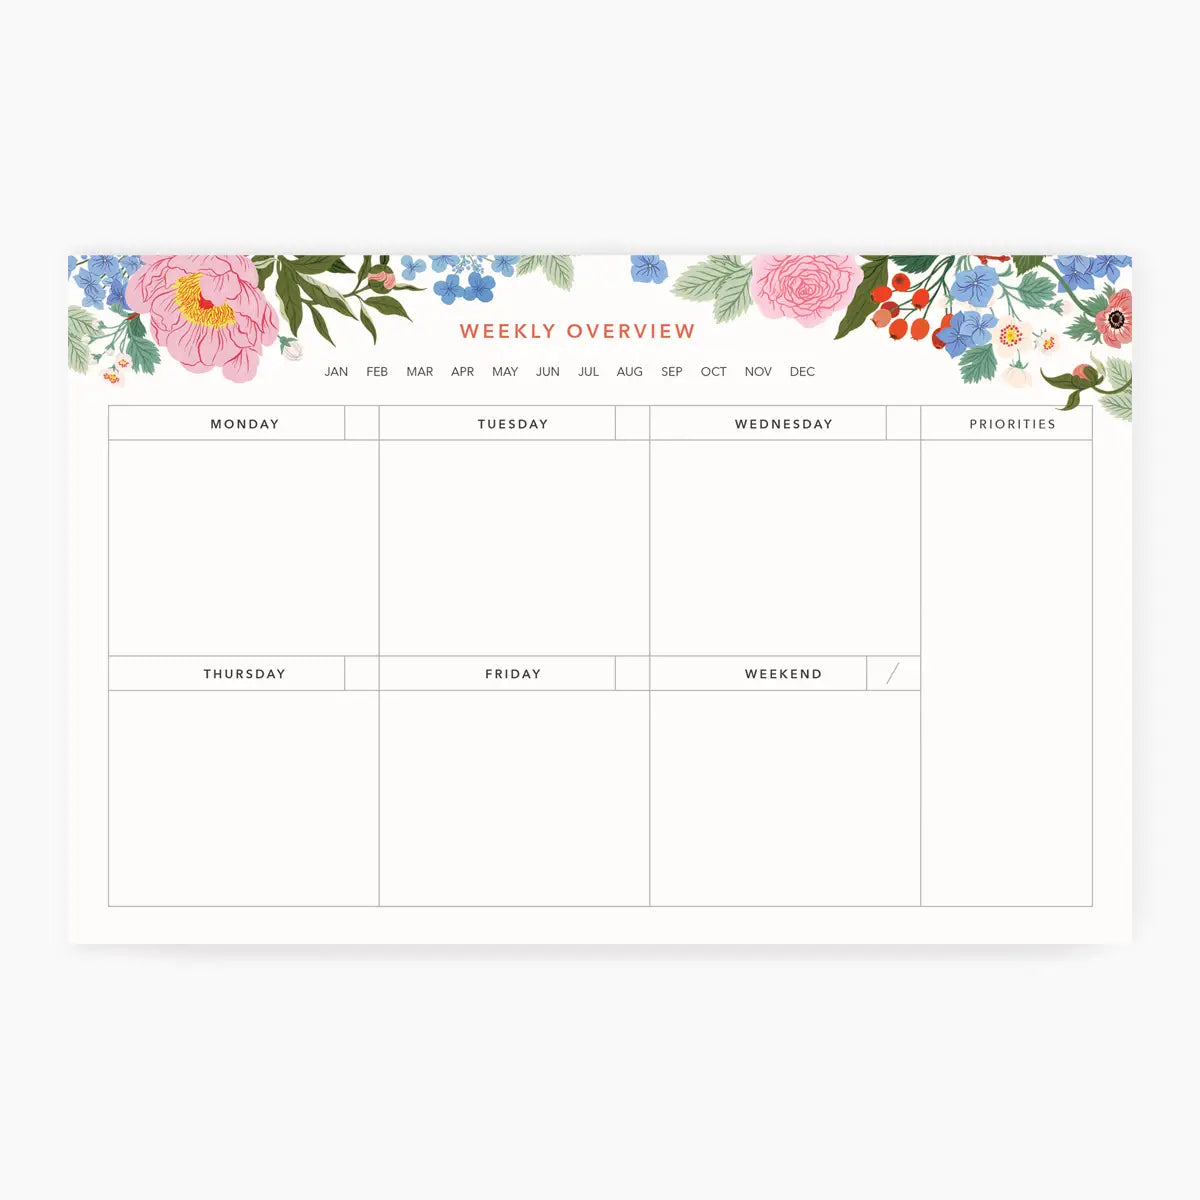 Weekly overview Notepad 'Garden' by Botanica Paper co.